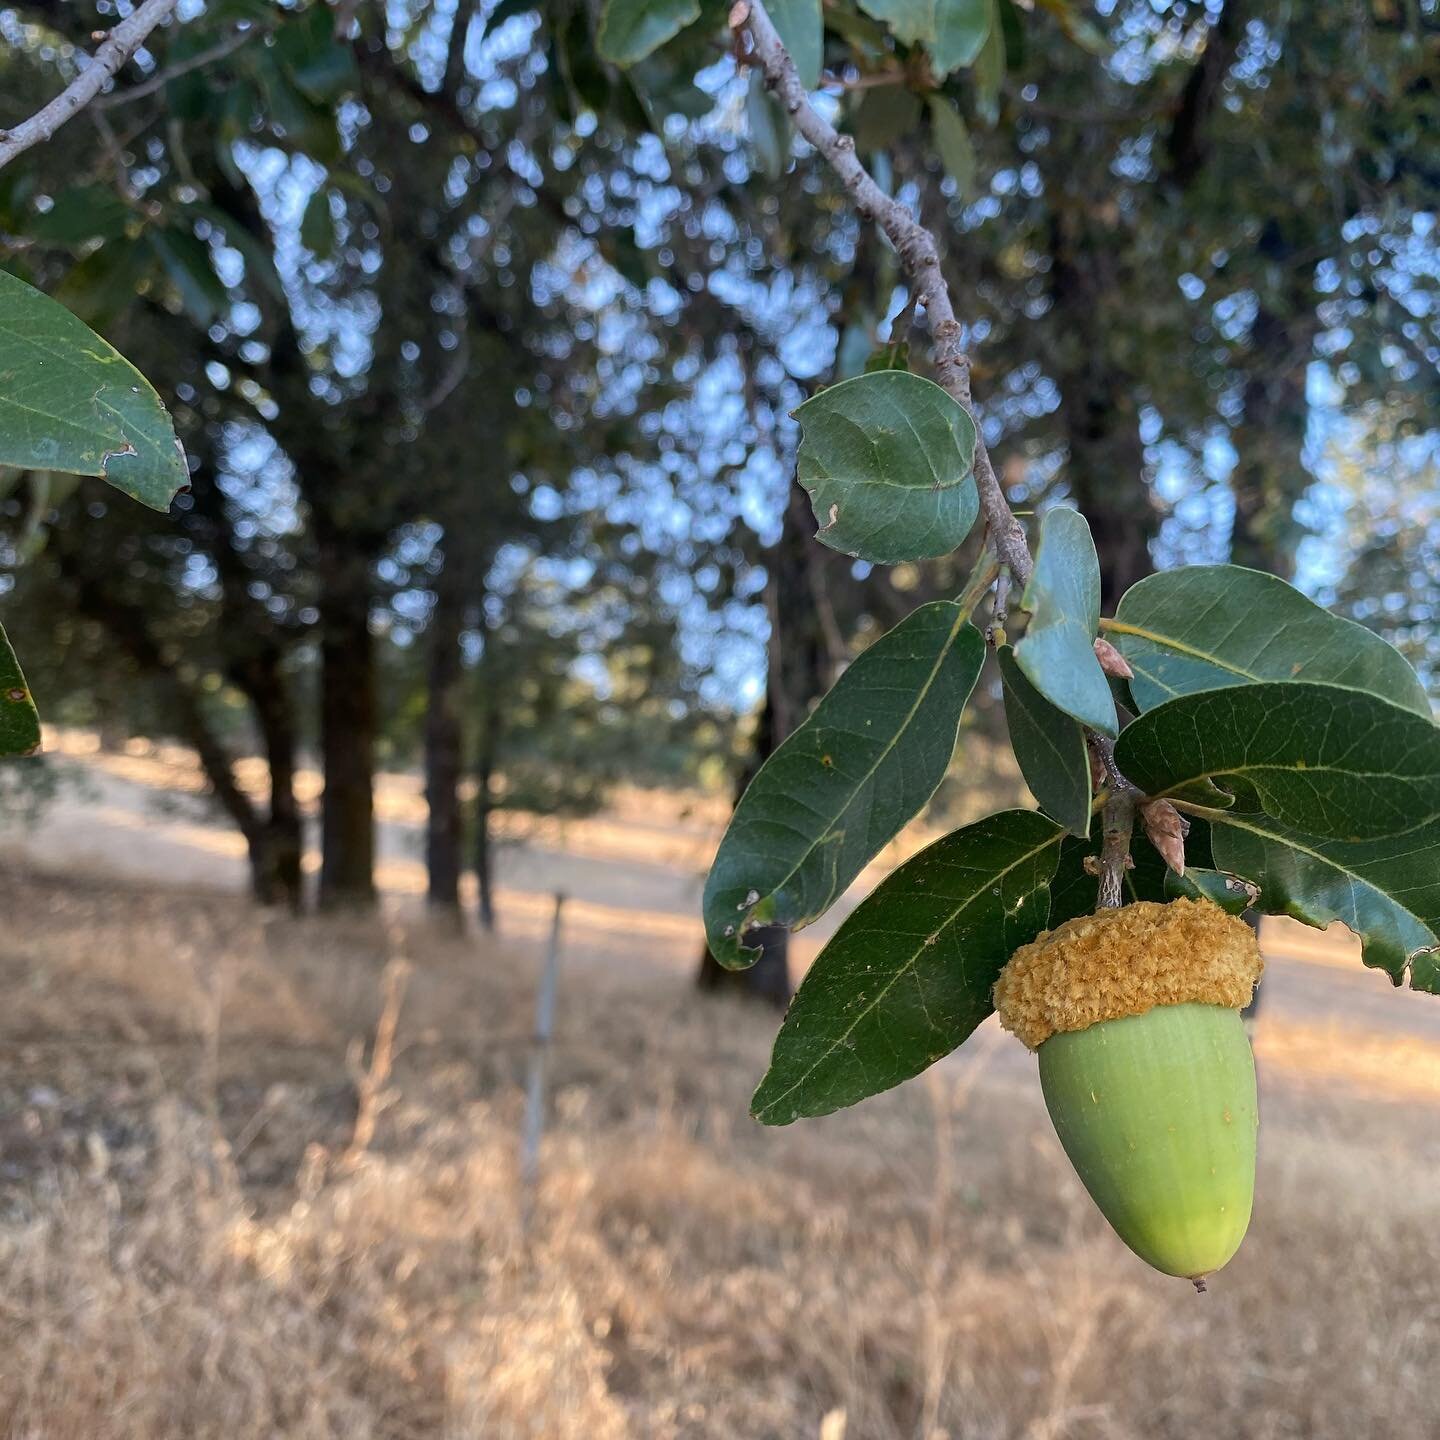 Fire season has reared its ugly head again, but here is one glorious, shining moment, with clear air, and a nice breeze and the promise of a beautiful, acornful fall and winter ahead. My favorite Canyon Live Oak looks like it&rsquo;s going to have a 